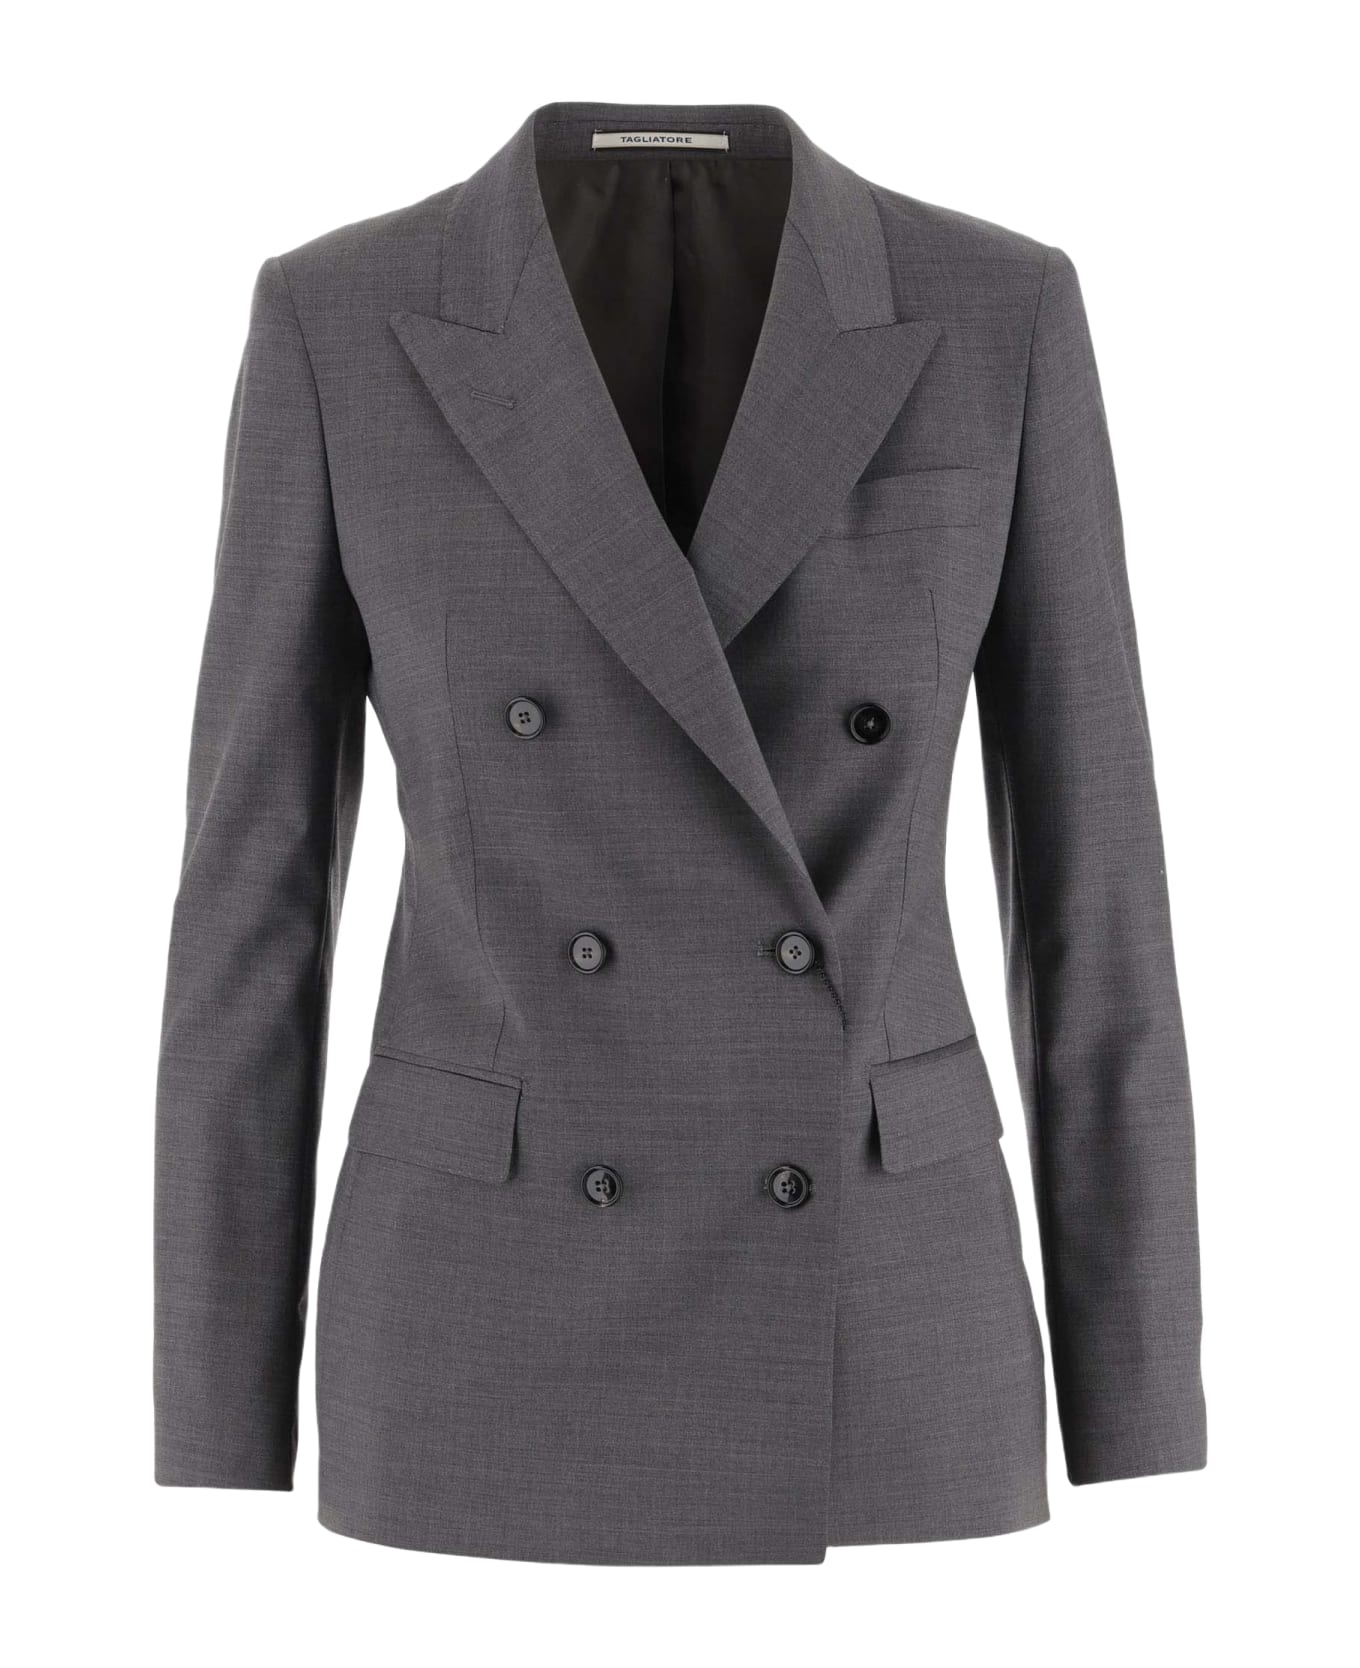 Tagliatore Double-breasted Stretch Wool Jacket - Grey コート